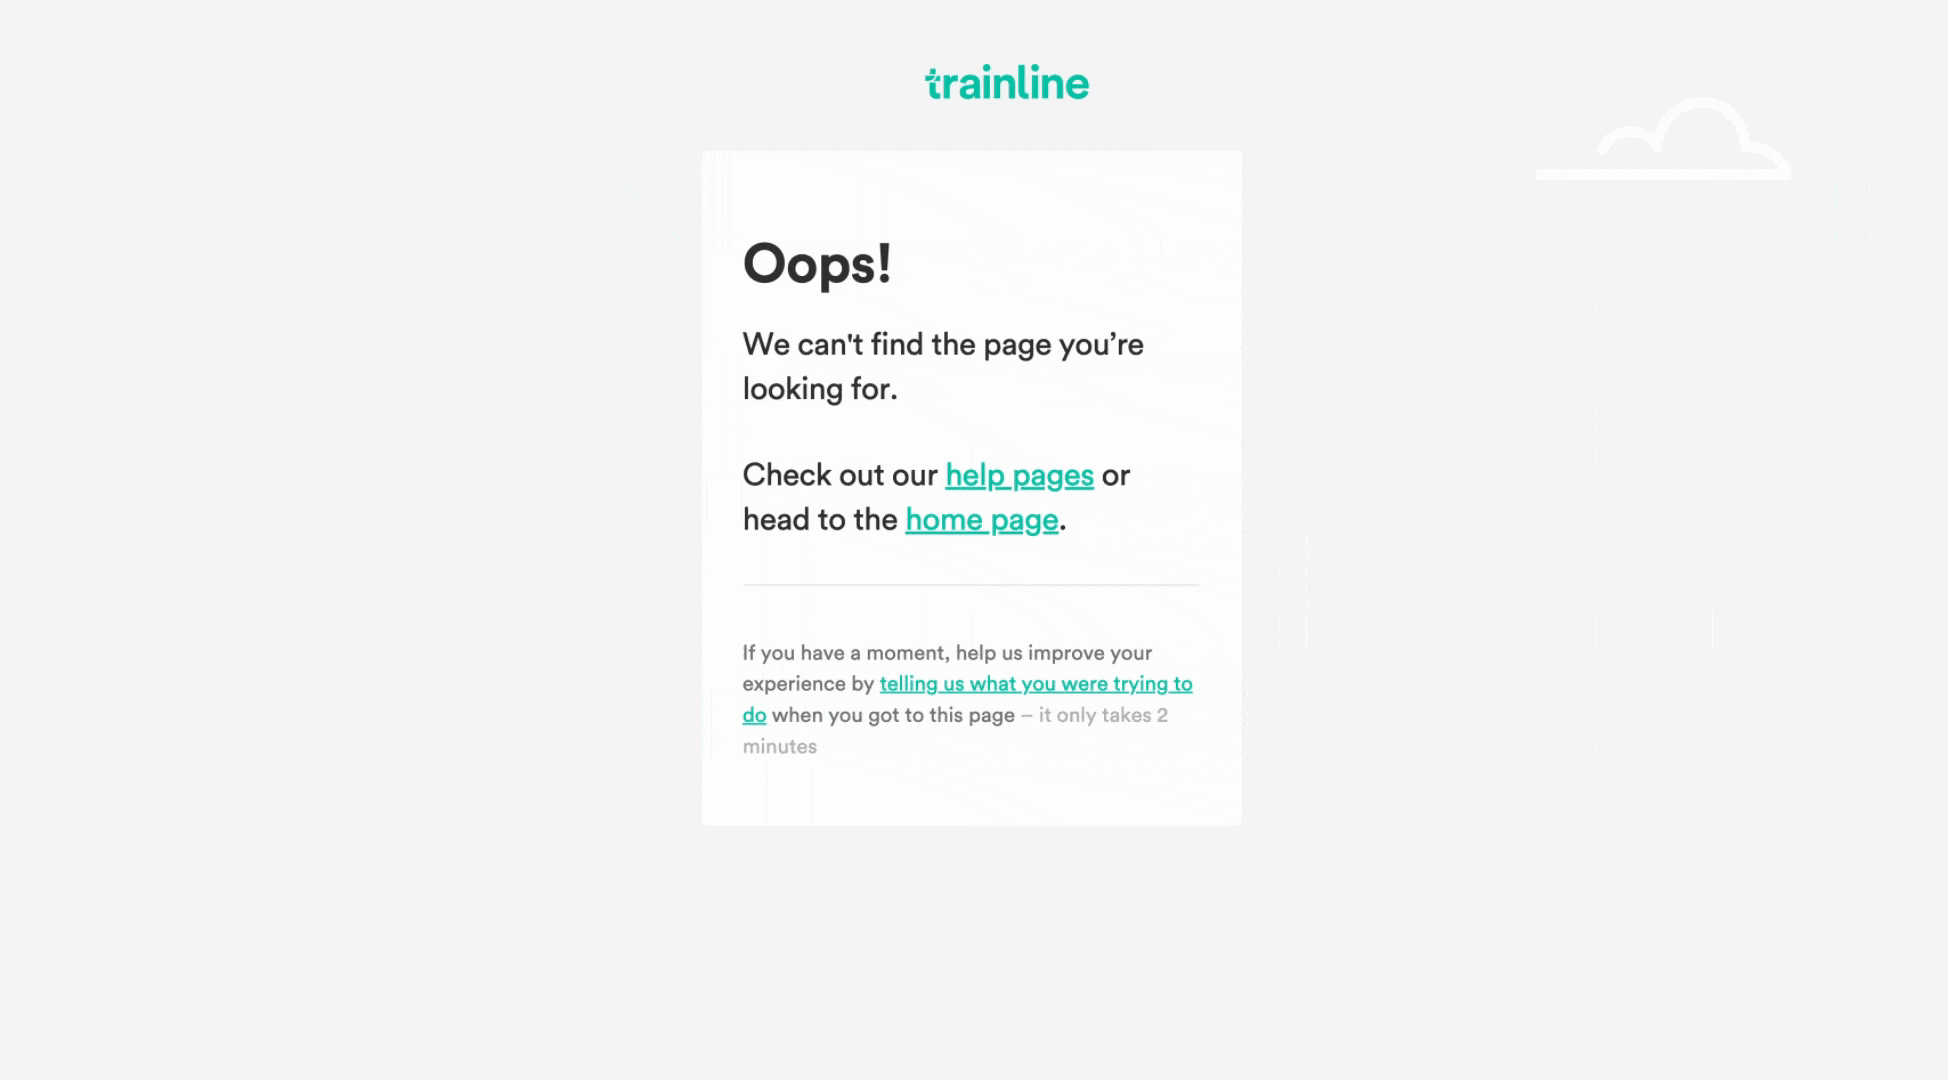 While interacting with the website Trainline recently, the power that animations have in crafting a memorable brand and experience for users was reaffirmed. 